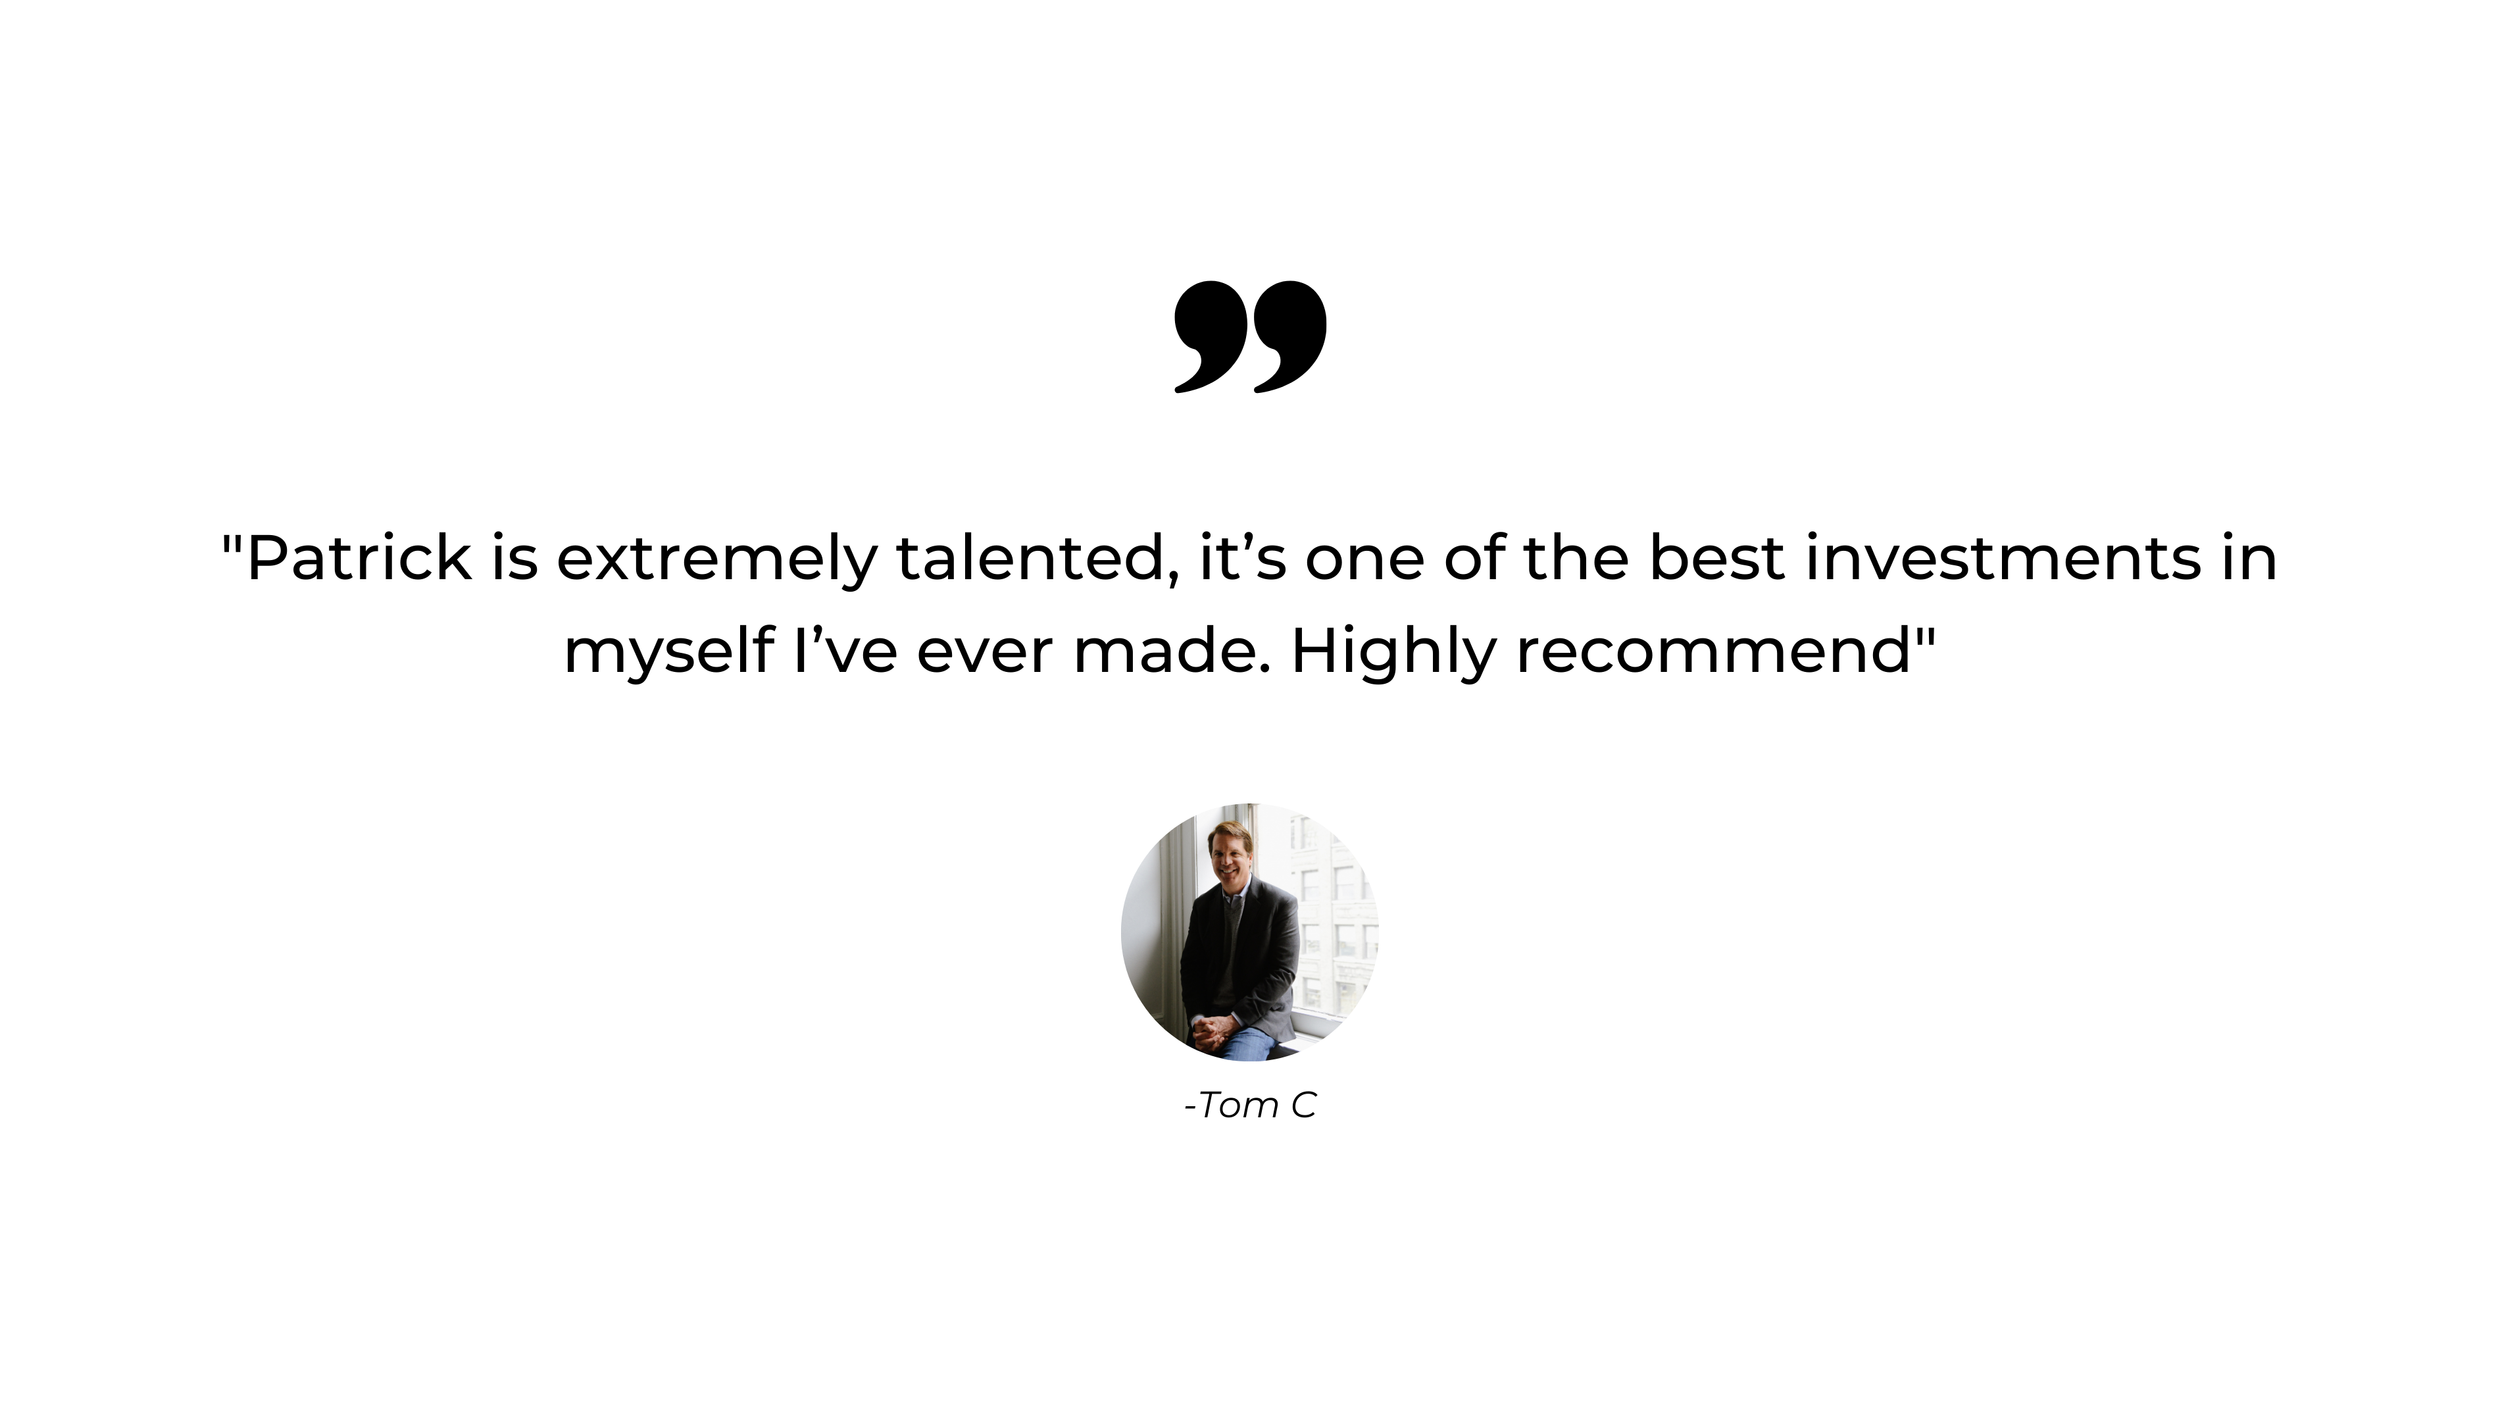 mens-personal-stylist-Pivot-Image-online-review-testimonial- (7).png